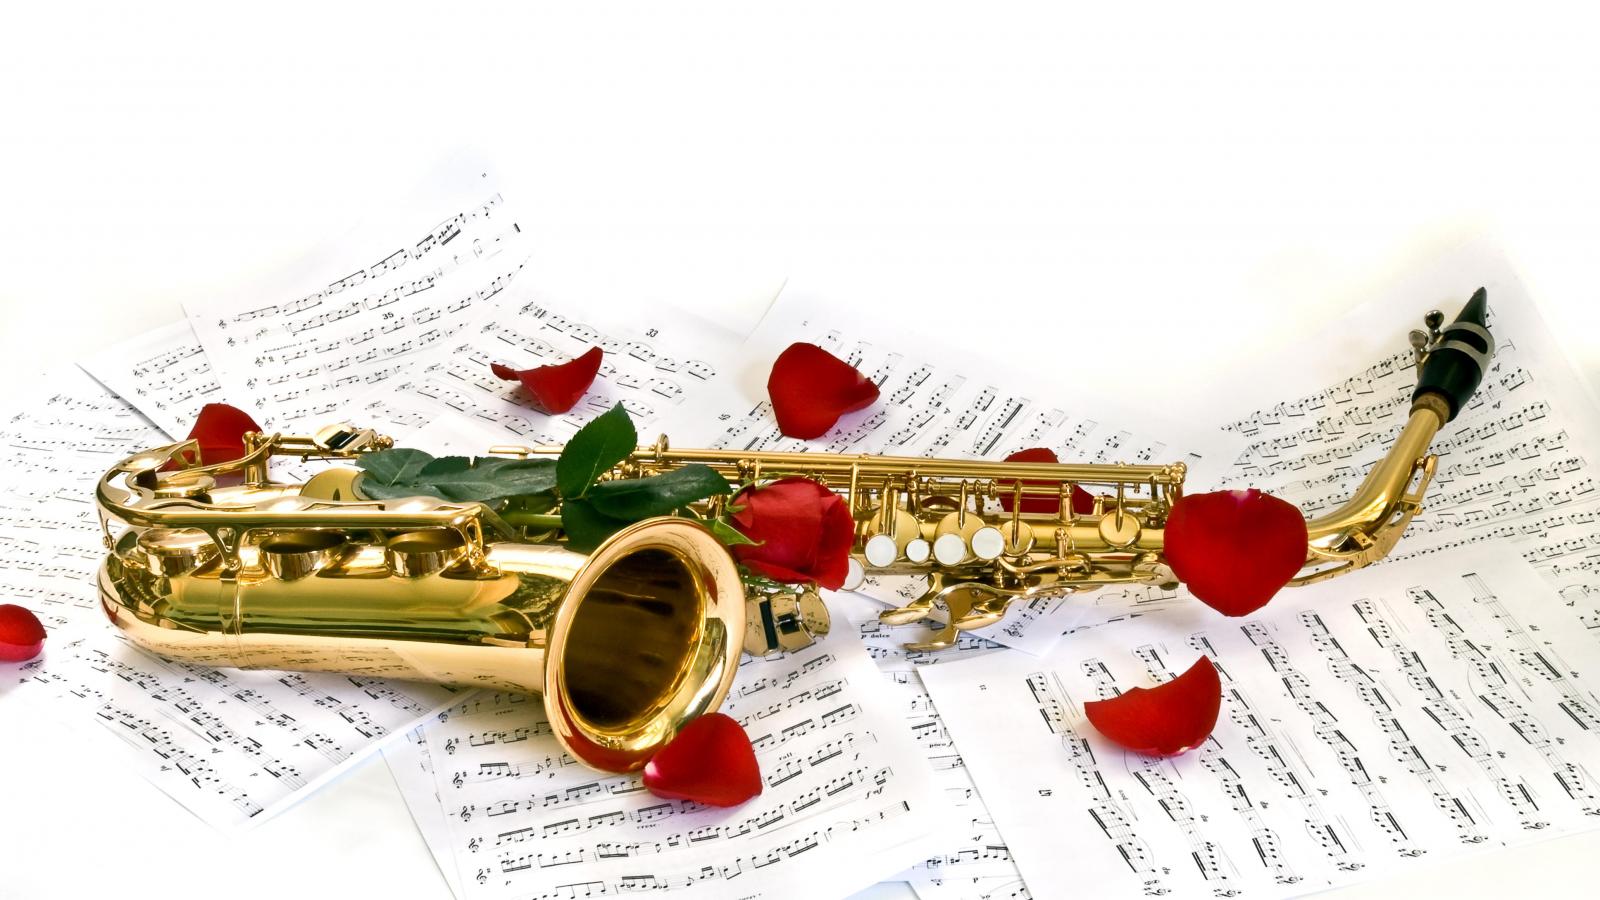 Saxophone - 27 Good PC Background Wallpapers Collection